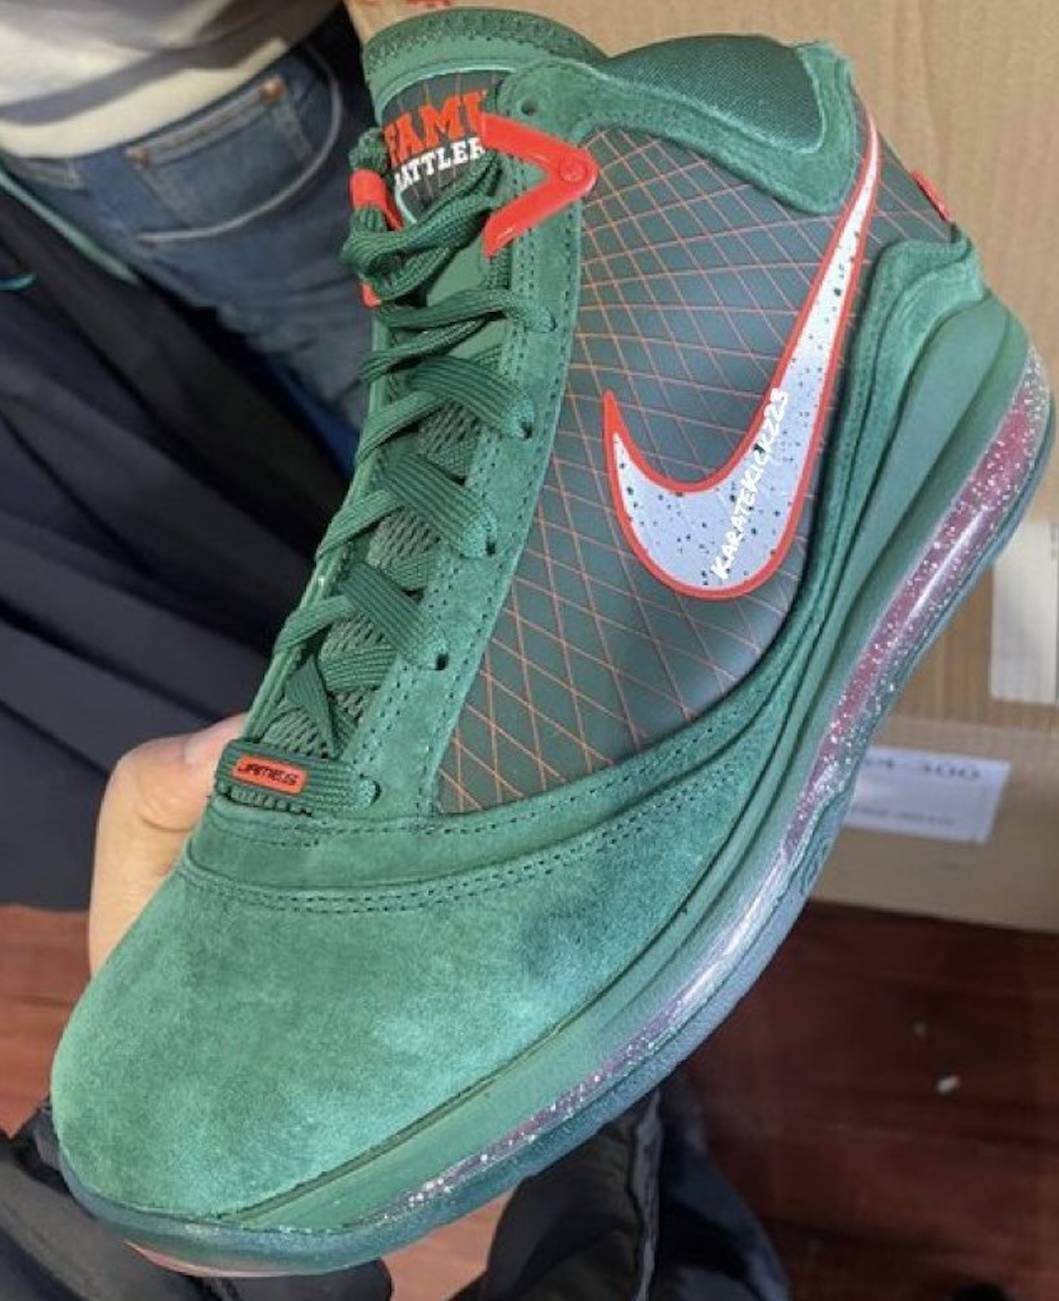 Nike LeBron 7 FAMU Florida AM Gorge Green DX8554-300 Release Date First Look